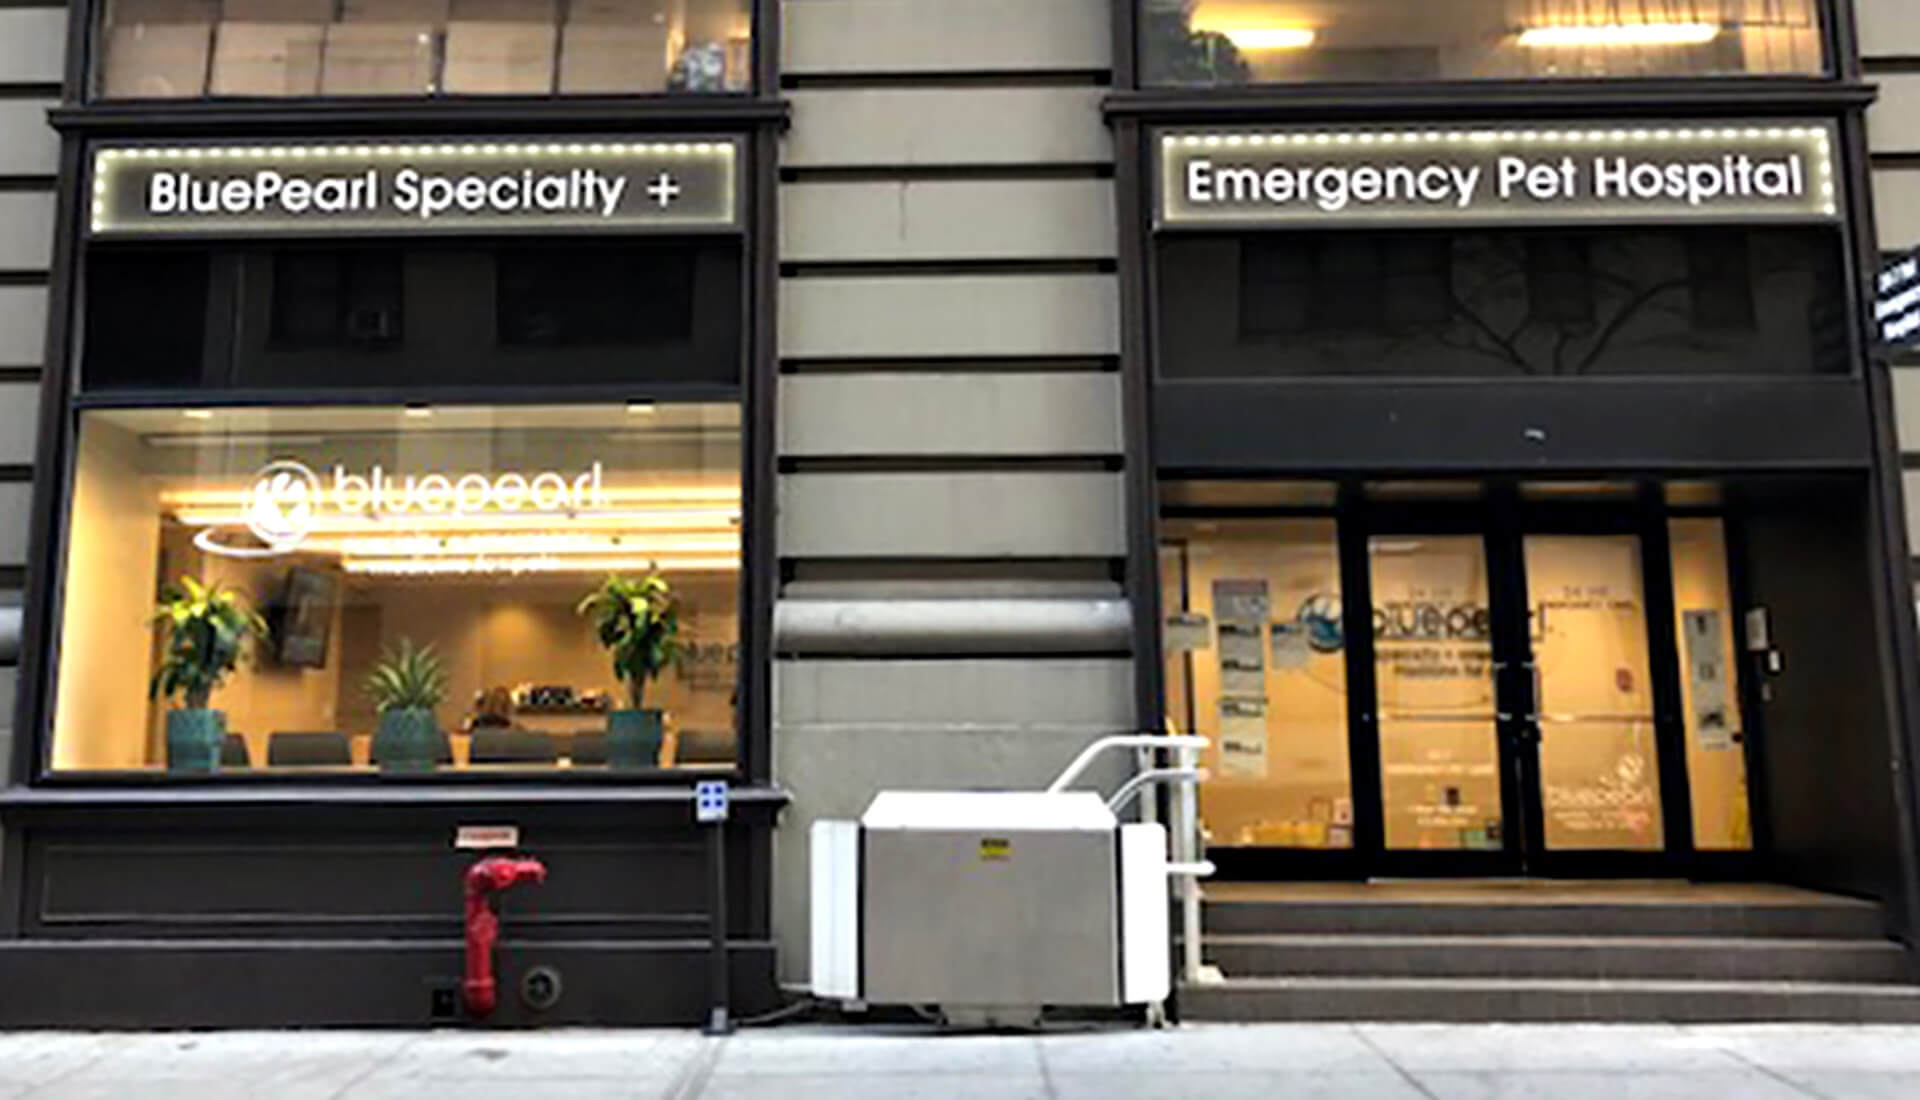 An exterior view of the BluePearl Pet Hospital in Downtown NYC.